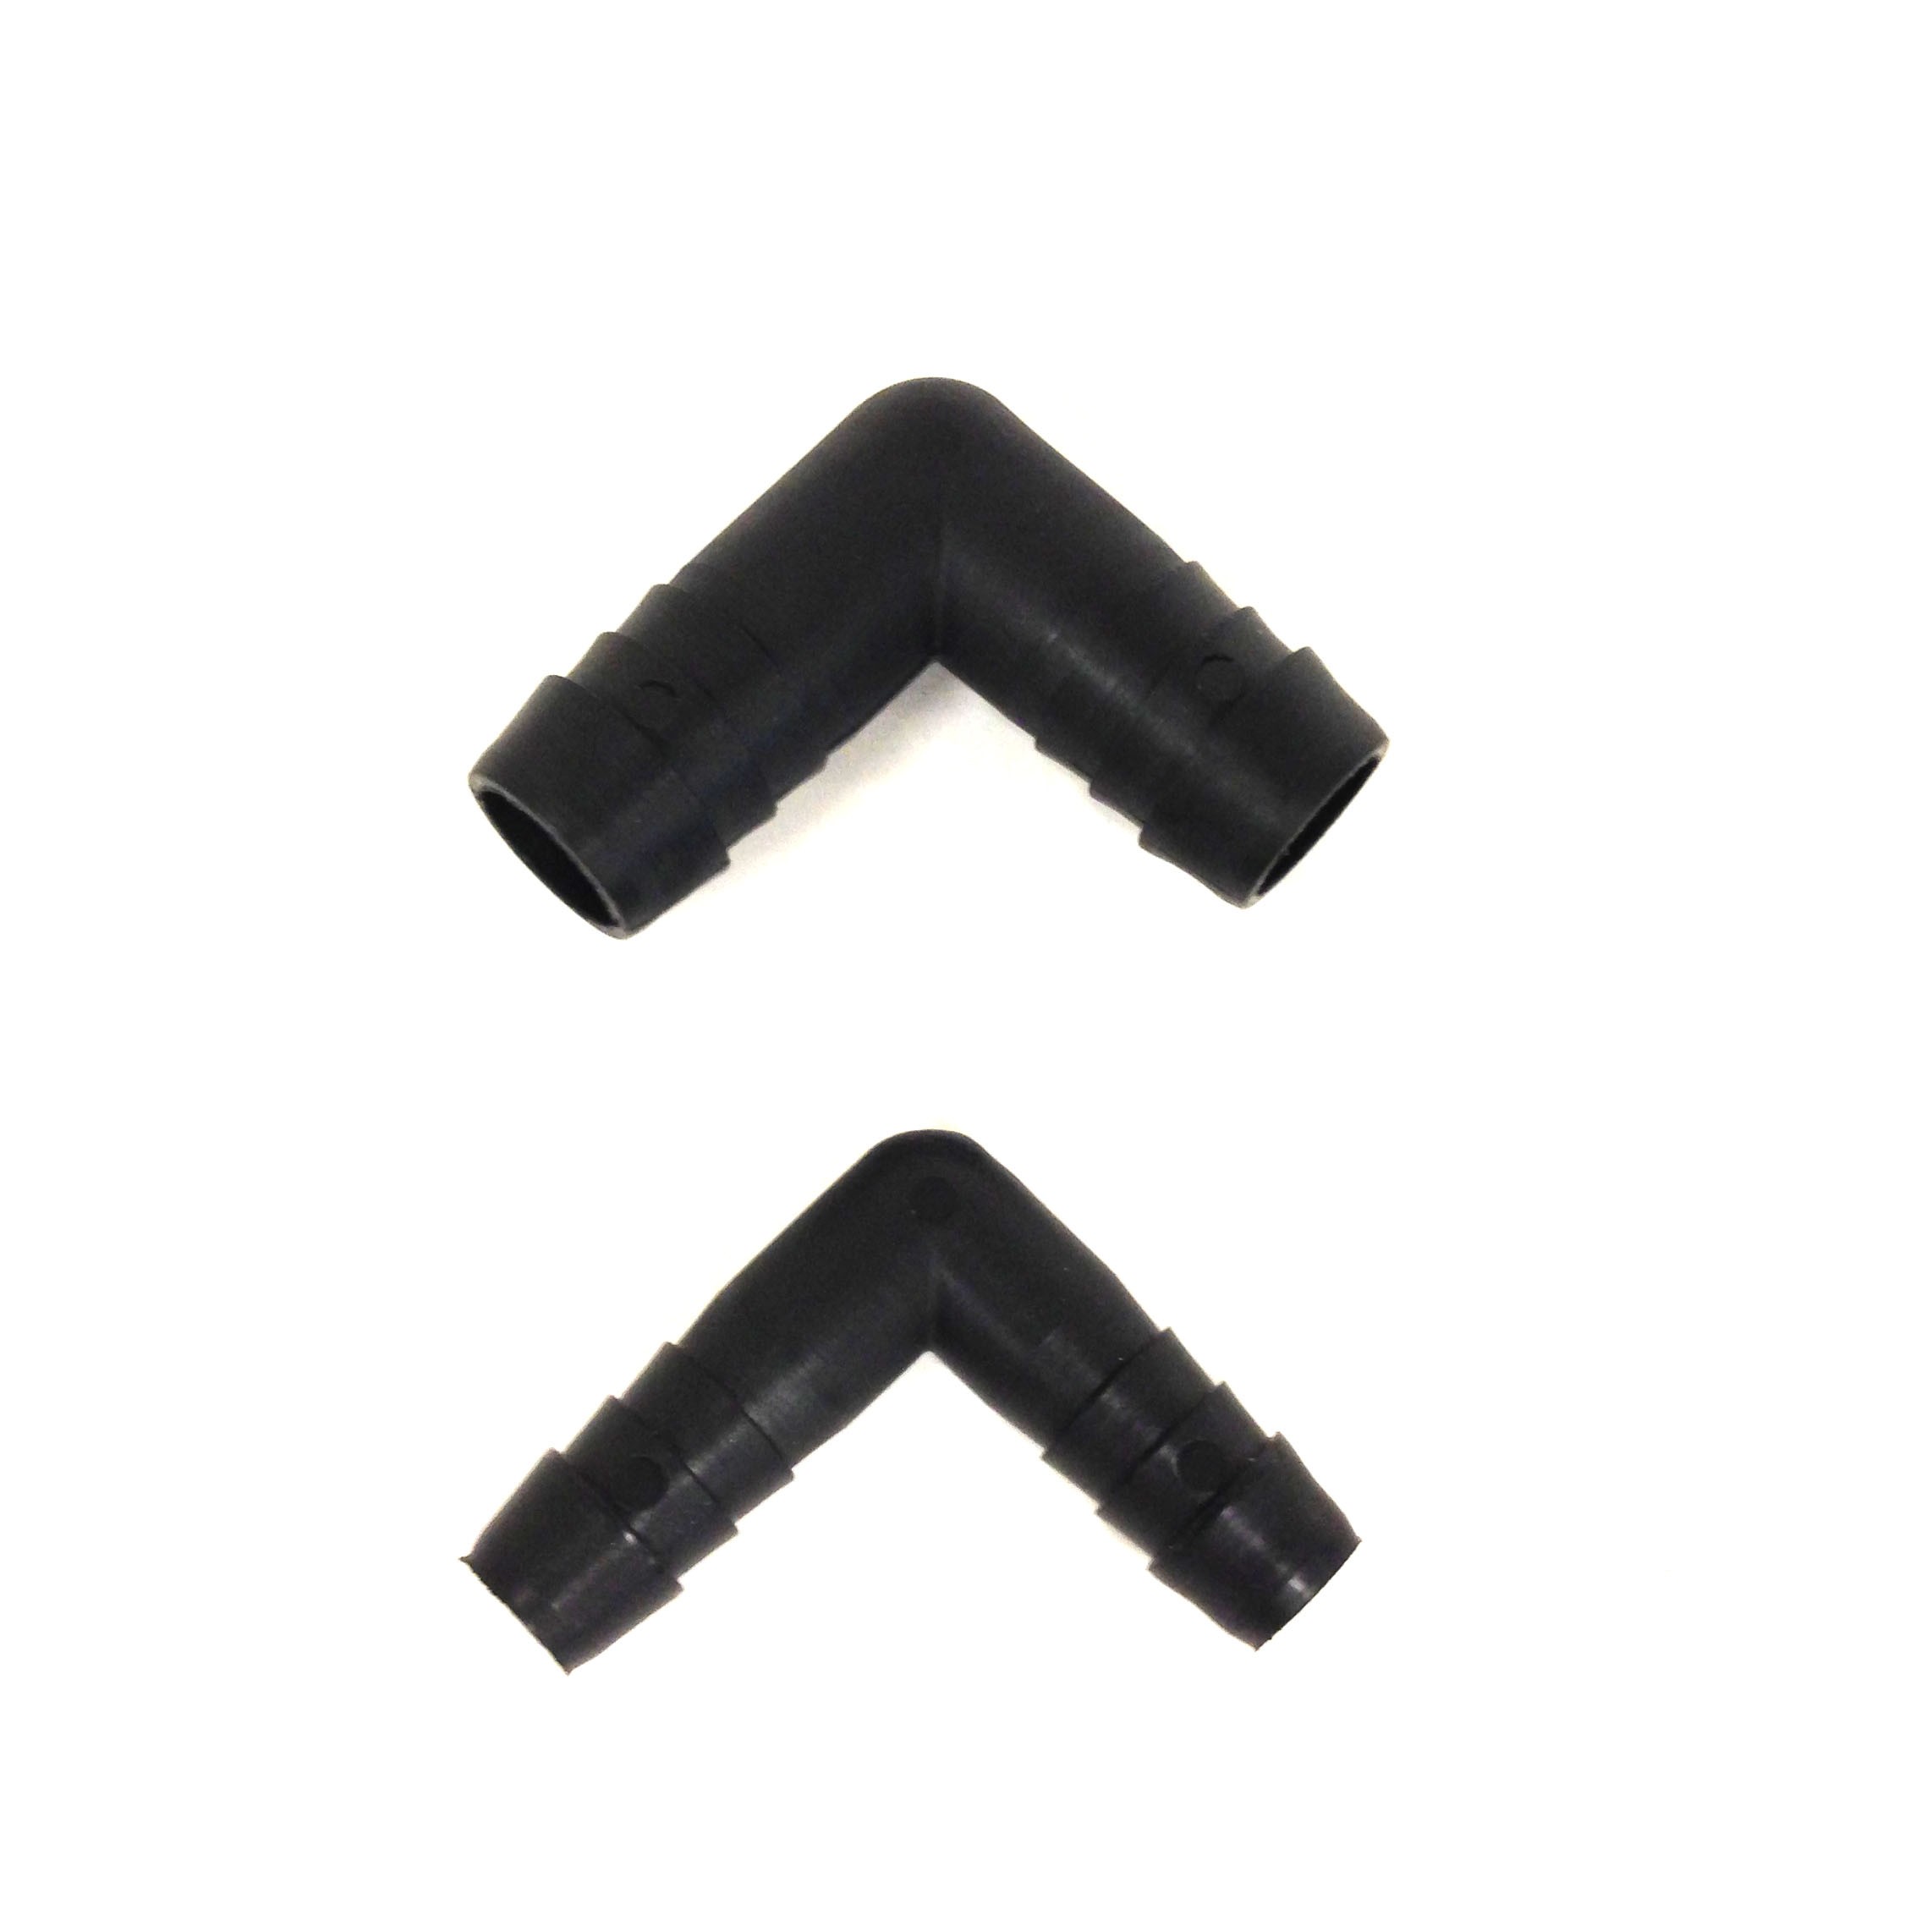 Curved hose adapters